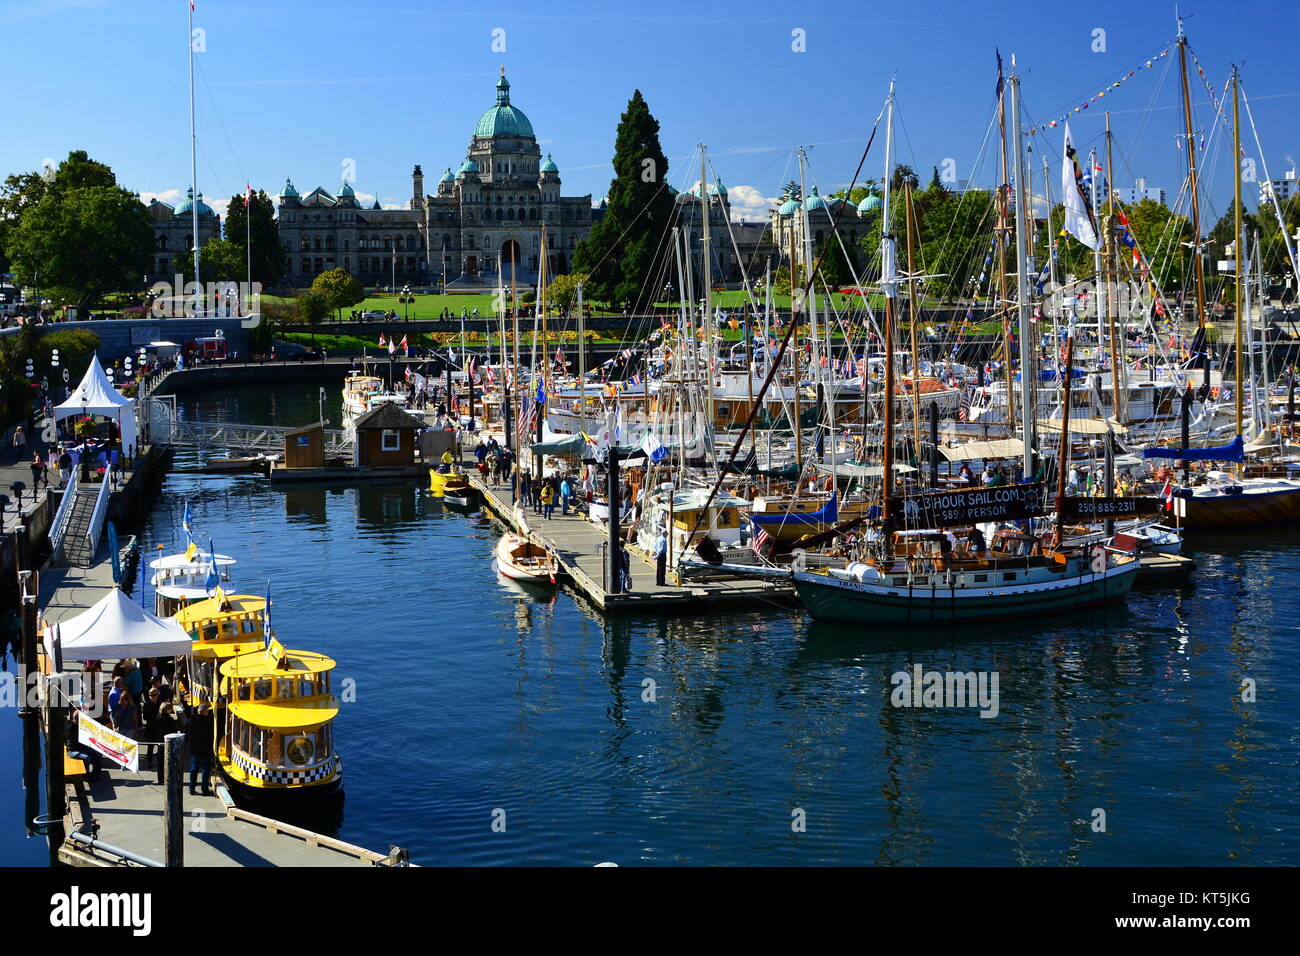 The glorious inner harbor filled with boats in Victoria BC, Canada. Stock Photo